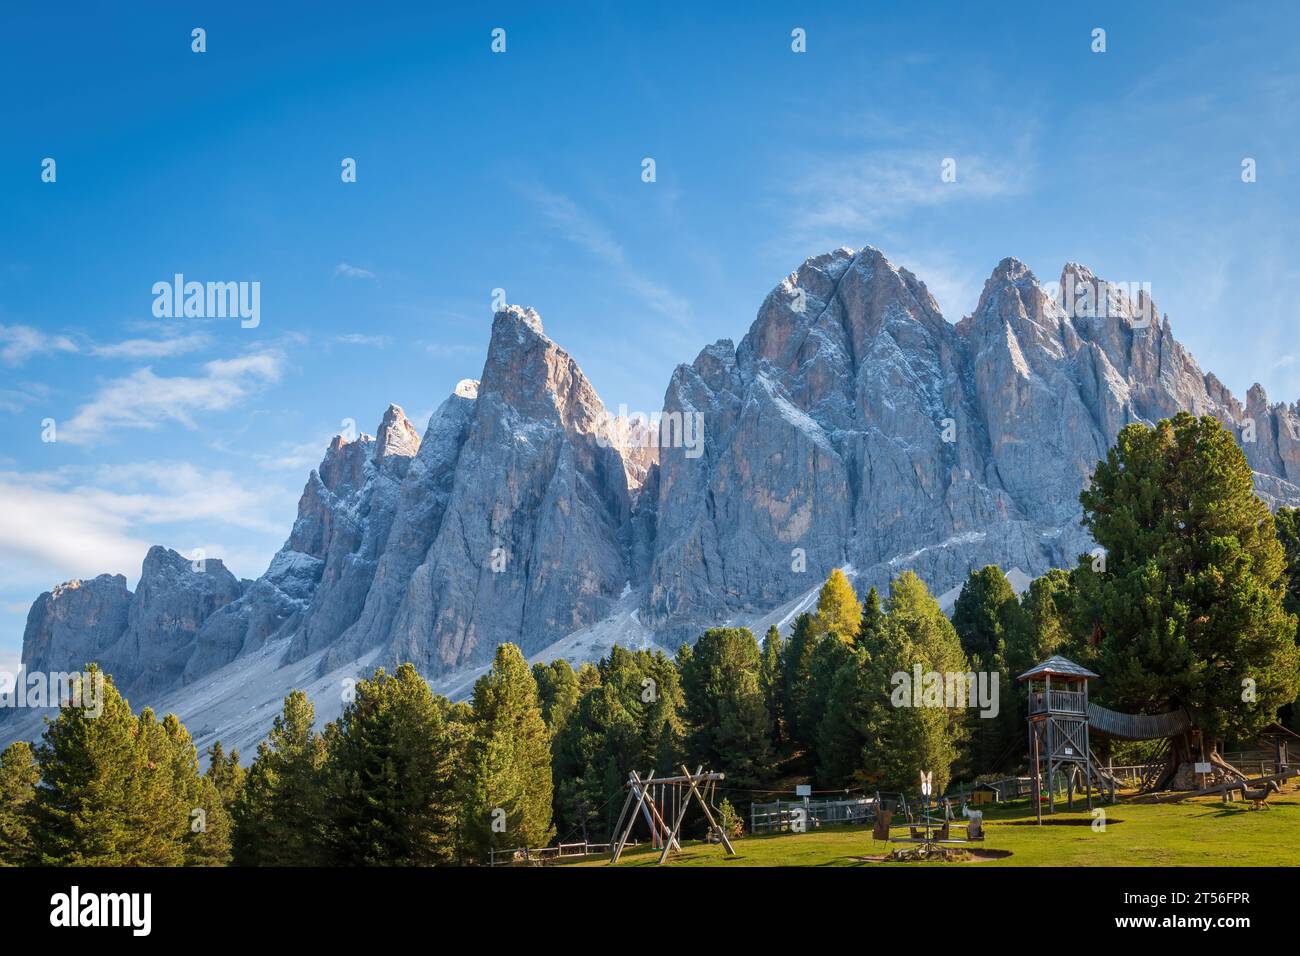 Scenic view of La Furchetta and Sass Rigais mountains, Dolomites, South Tyrol, Italy in the background of a playground against blue sky Stock Photo